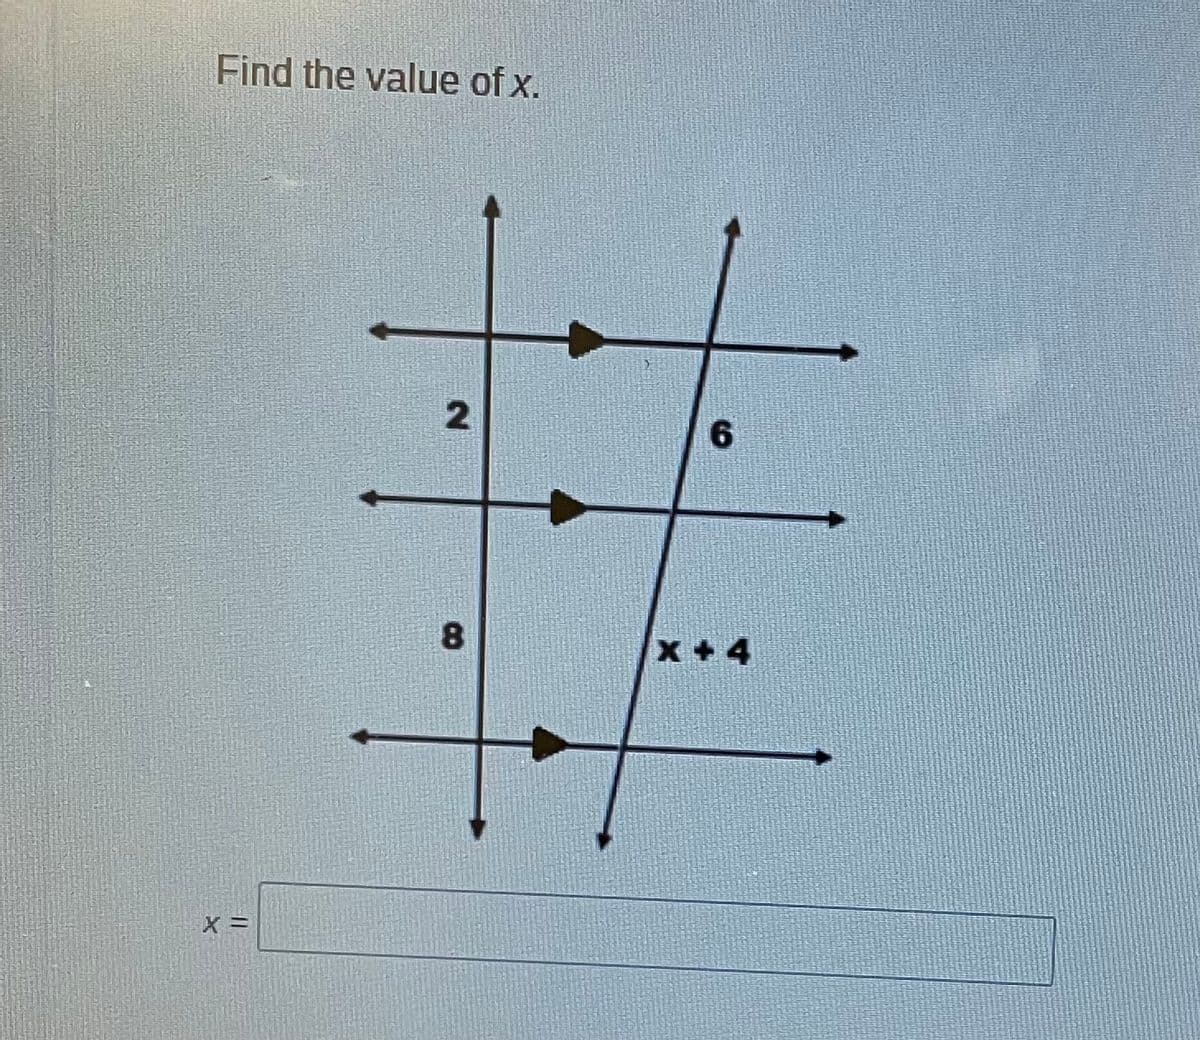 Find the value of x.
6.
X + 4
2.
